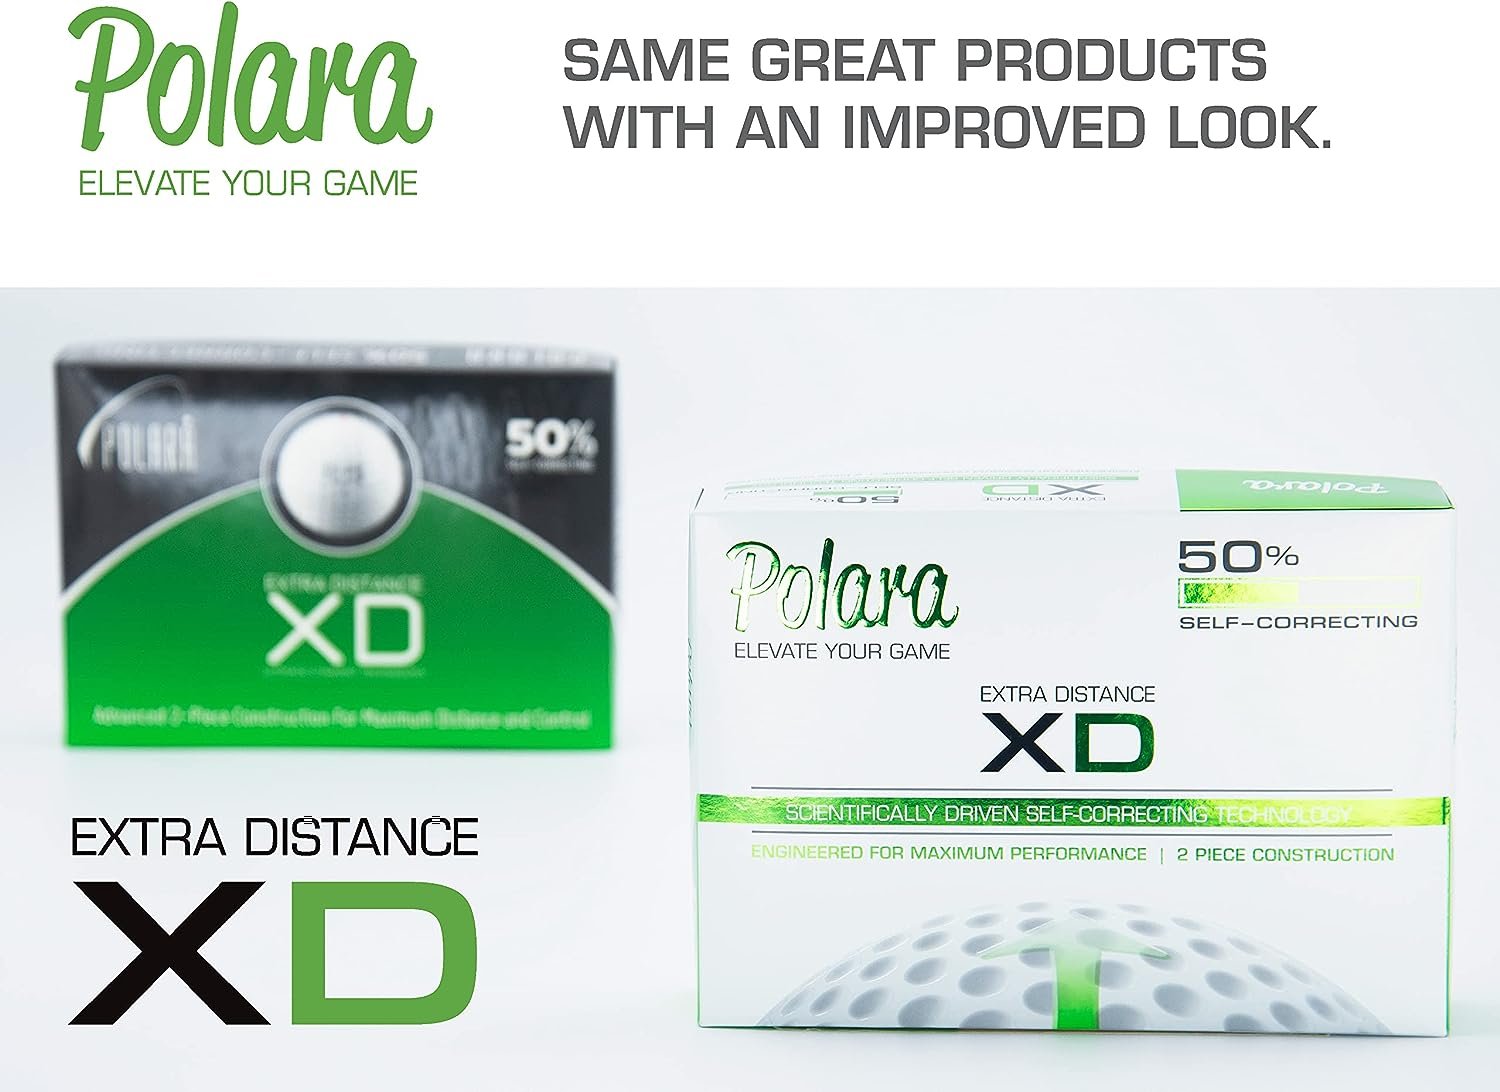 Polara Ultimate Straight, Extra Spin, Extra Distance, and Extra Distance  Spin Premium Golf Balls | Hook and Slice Correction | Perfect for Recreational Golfers | 1 Dozen Balls